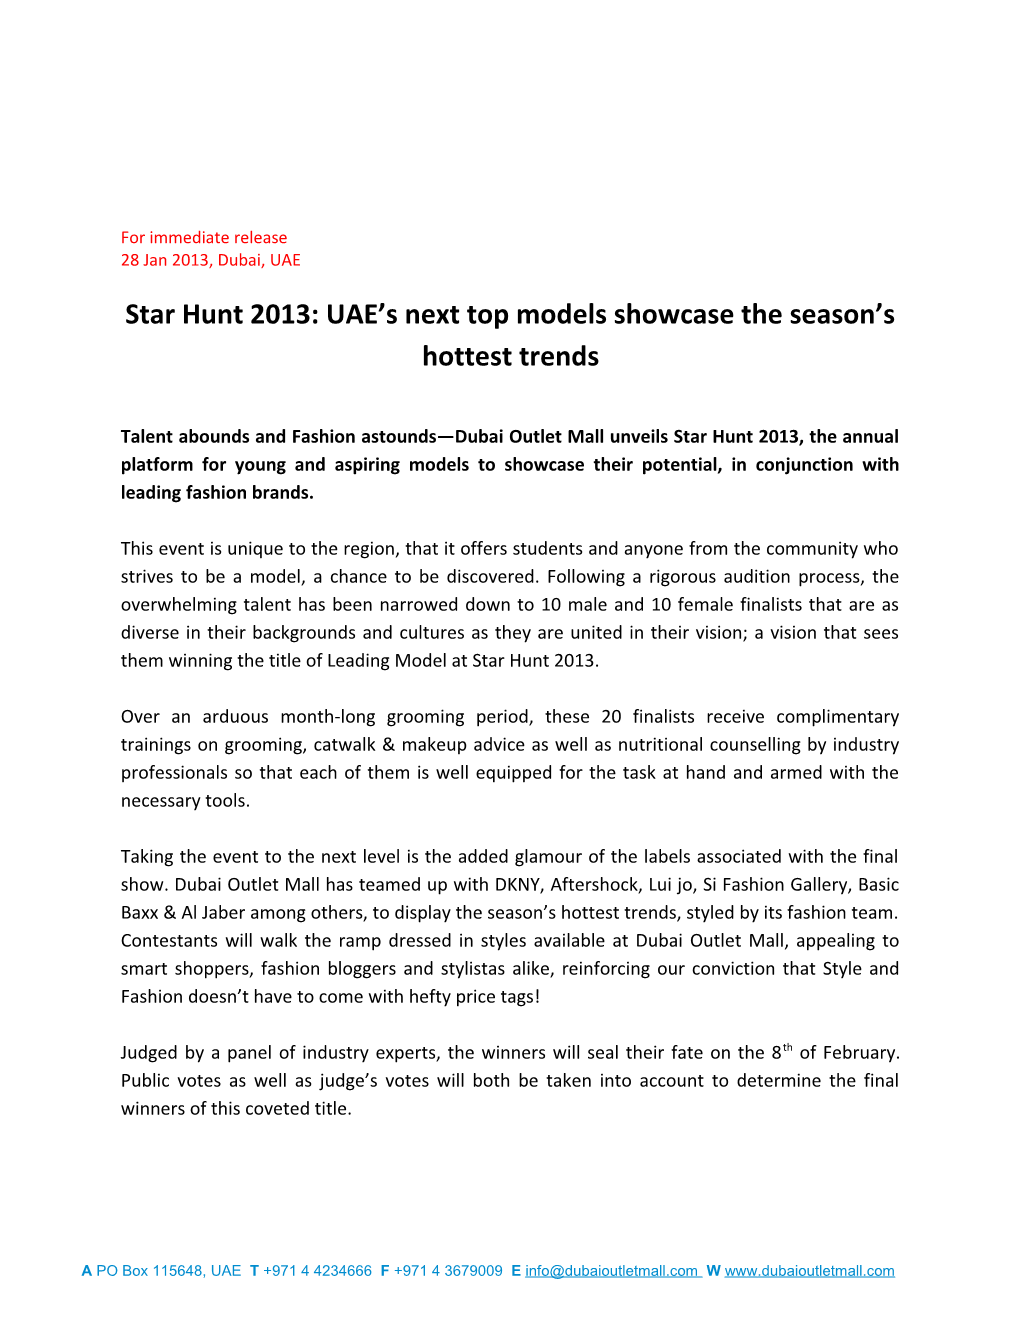 Star Hunt 2013: UAE S Next Top Models Showcase the Season S Hottest Trends